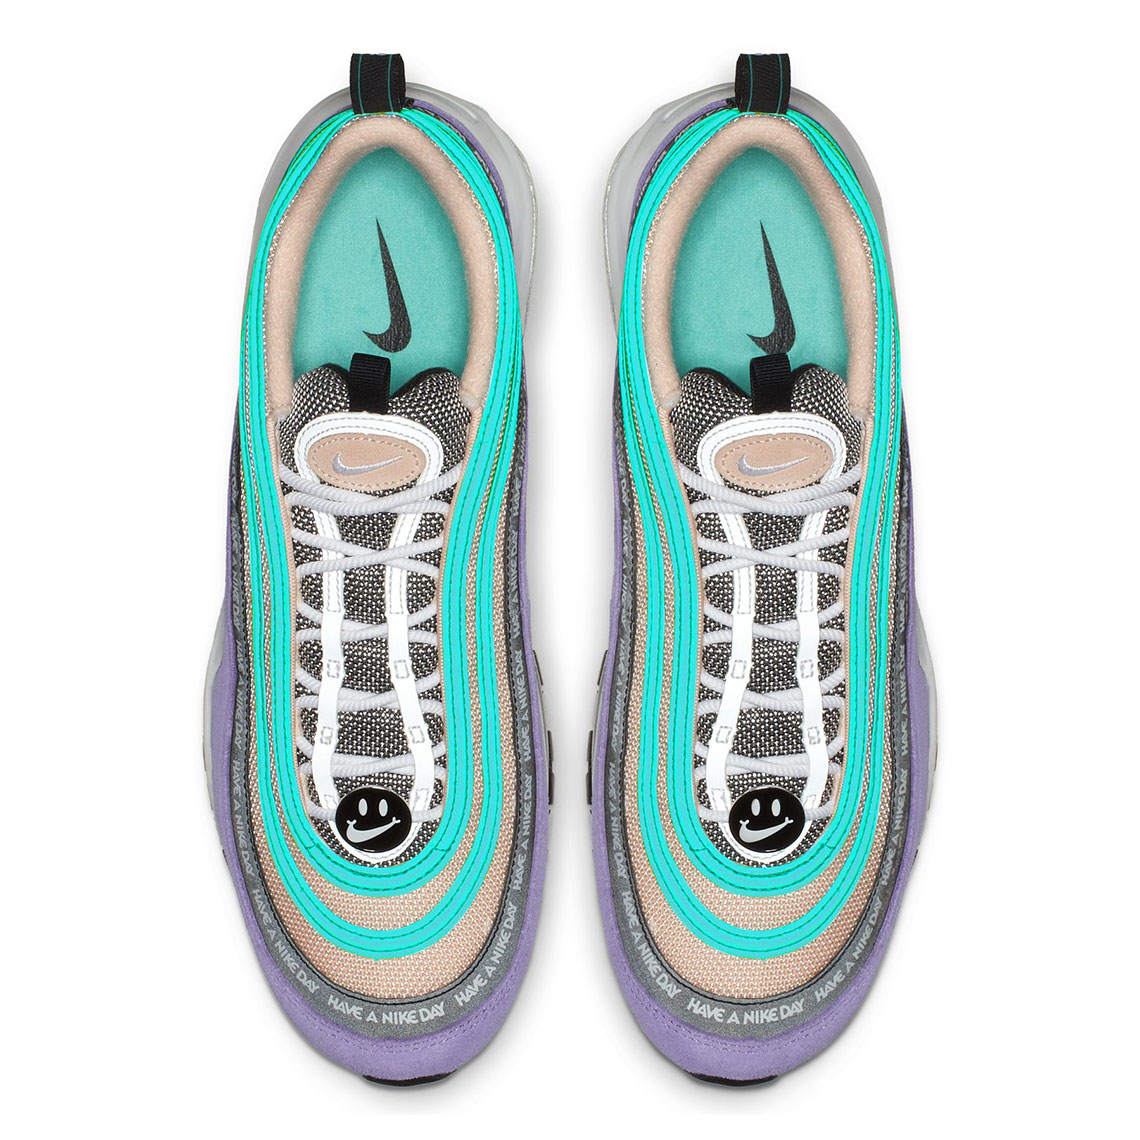 Nike Air 97 "Have A Day" Release Date BQ9130-500 | SneakerNews.com